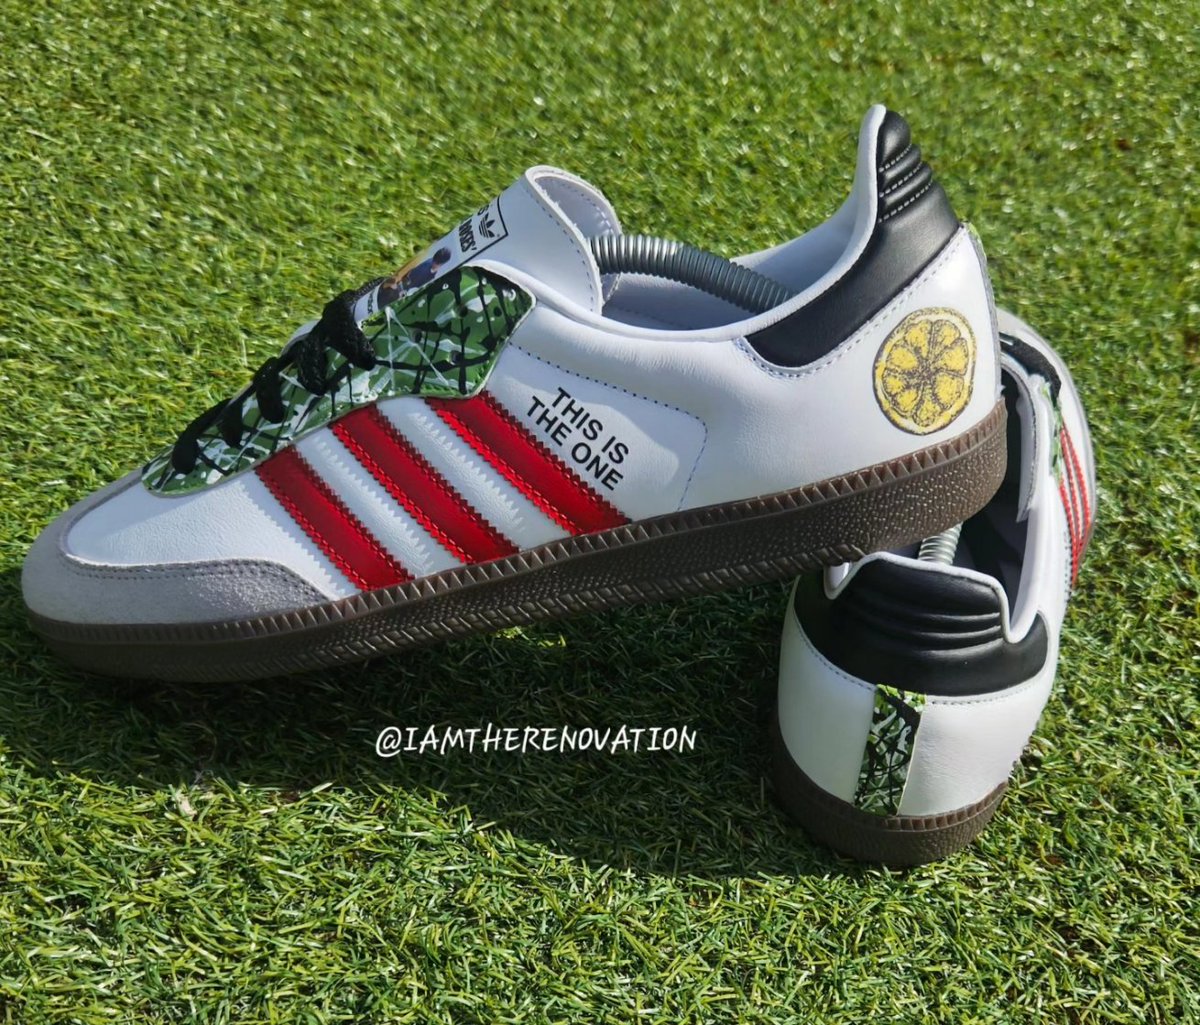 SAMBA O.G - Roses custom 

THIS IS THE ONE 🍋

Pollocked out with United red stripes and a black heel. Available with or without the new 'Roses are Red utd crest'

DM forenquiries and requests

#iamtherenovation
#SambaOG
#manutd
#stoneroses
#handpainte